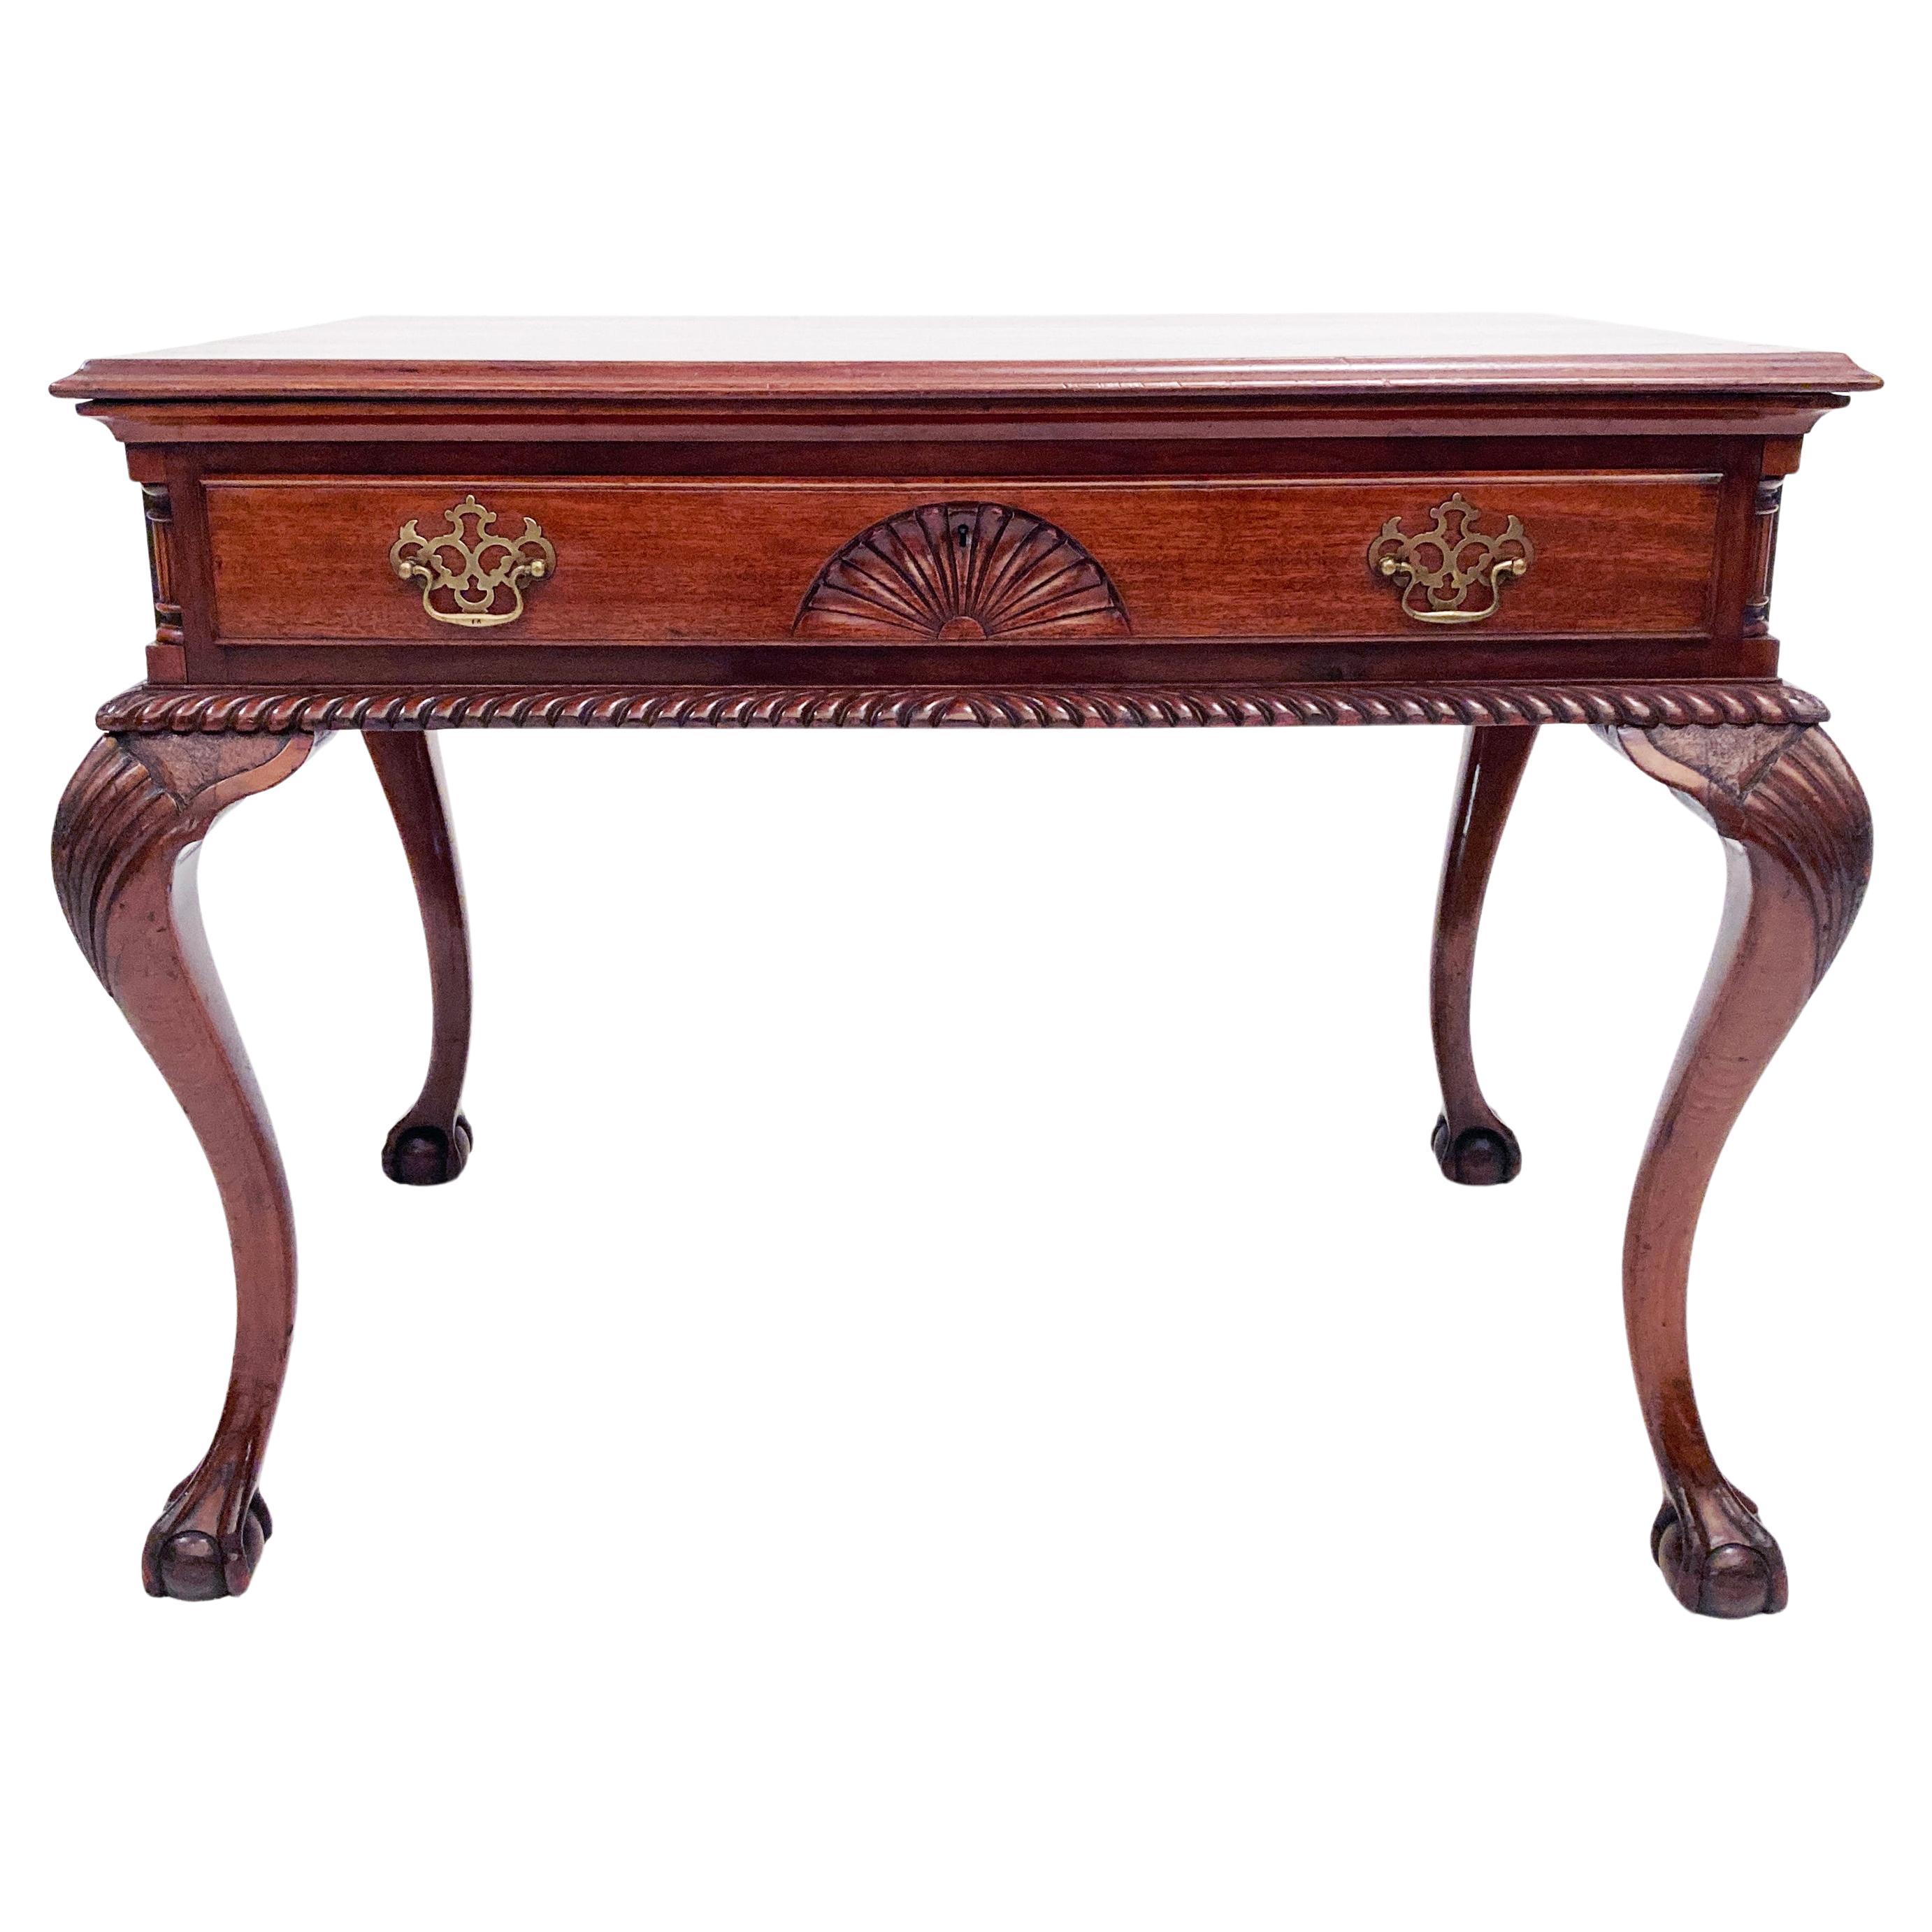 Single Drawer Mahogany Chippendale Table Ball Claw Feet English Mid 19th Century